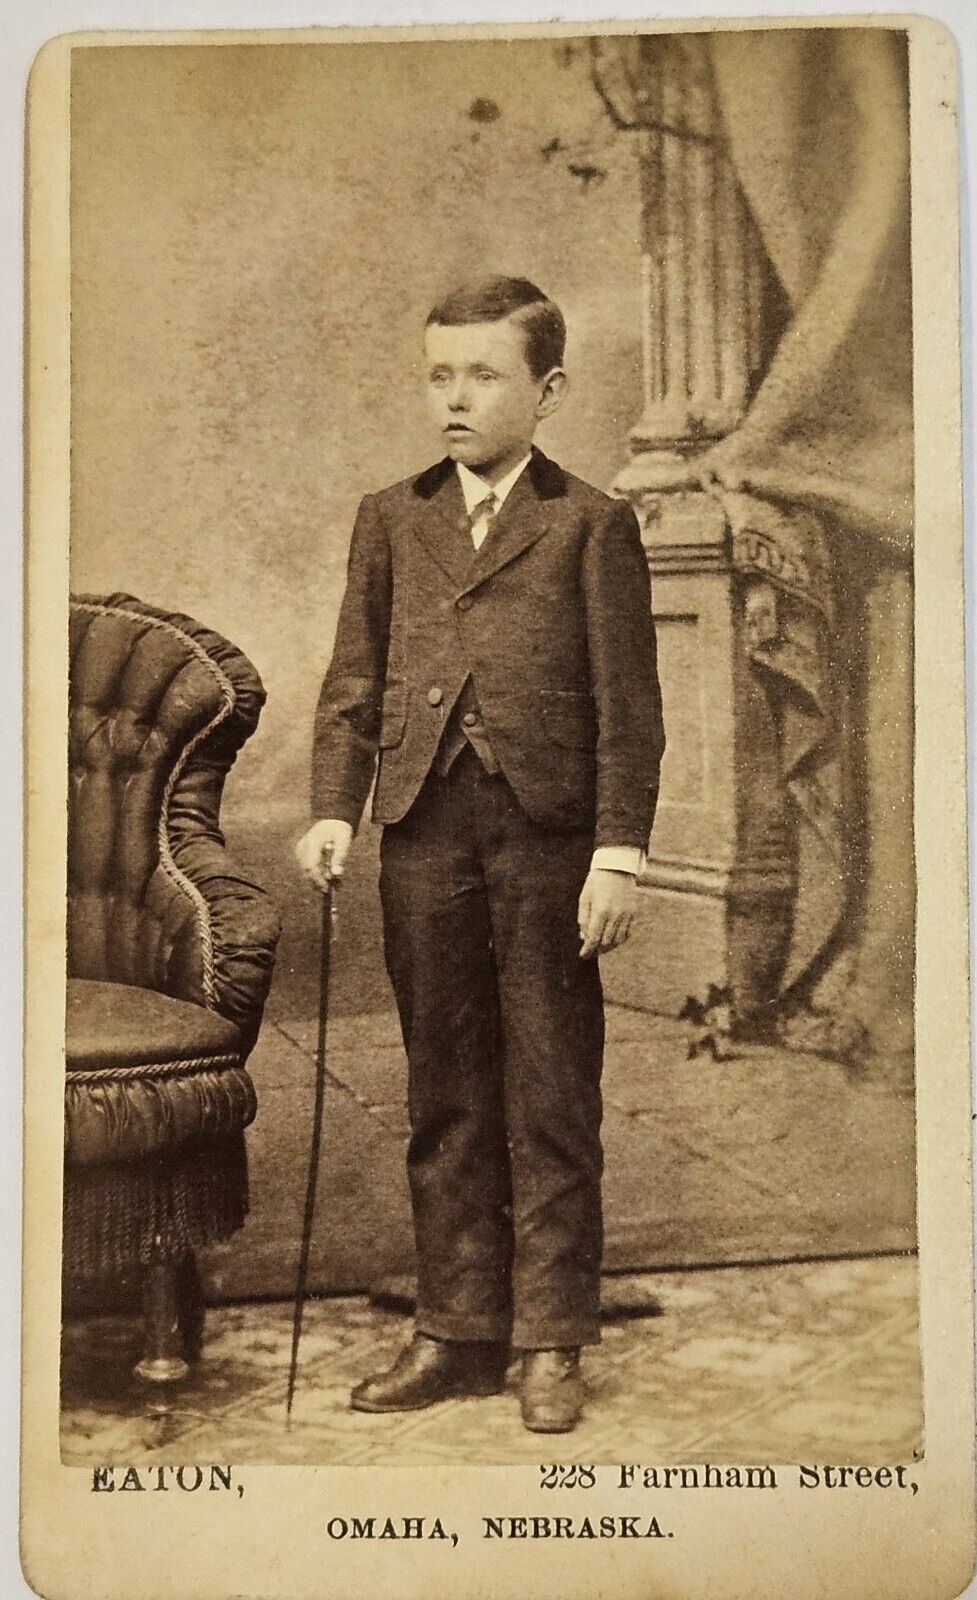 CDV Photo of Young Boy With A Cane In A Nice Suit. 1880s Omaha, Nebraska 